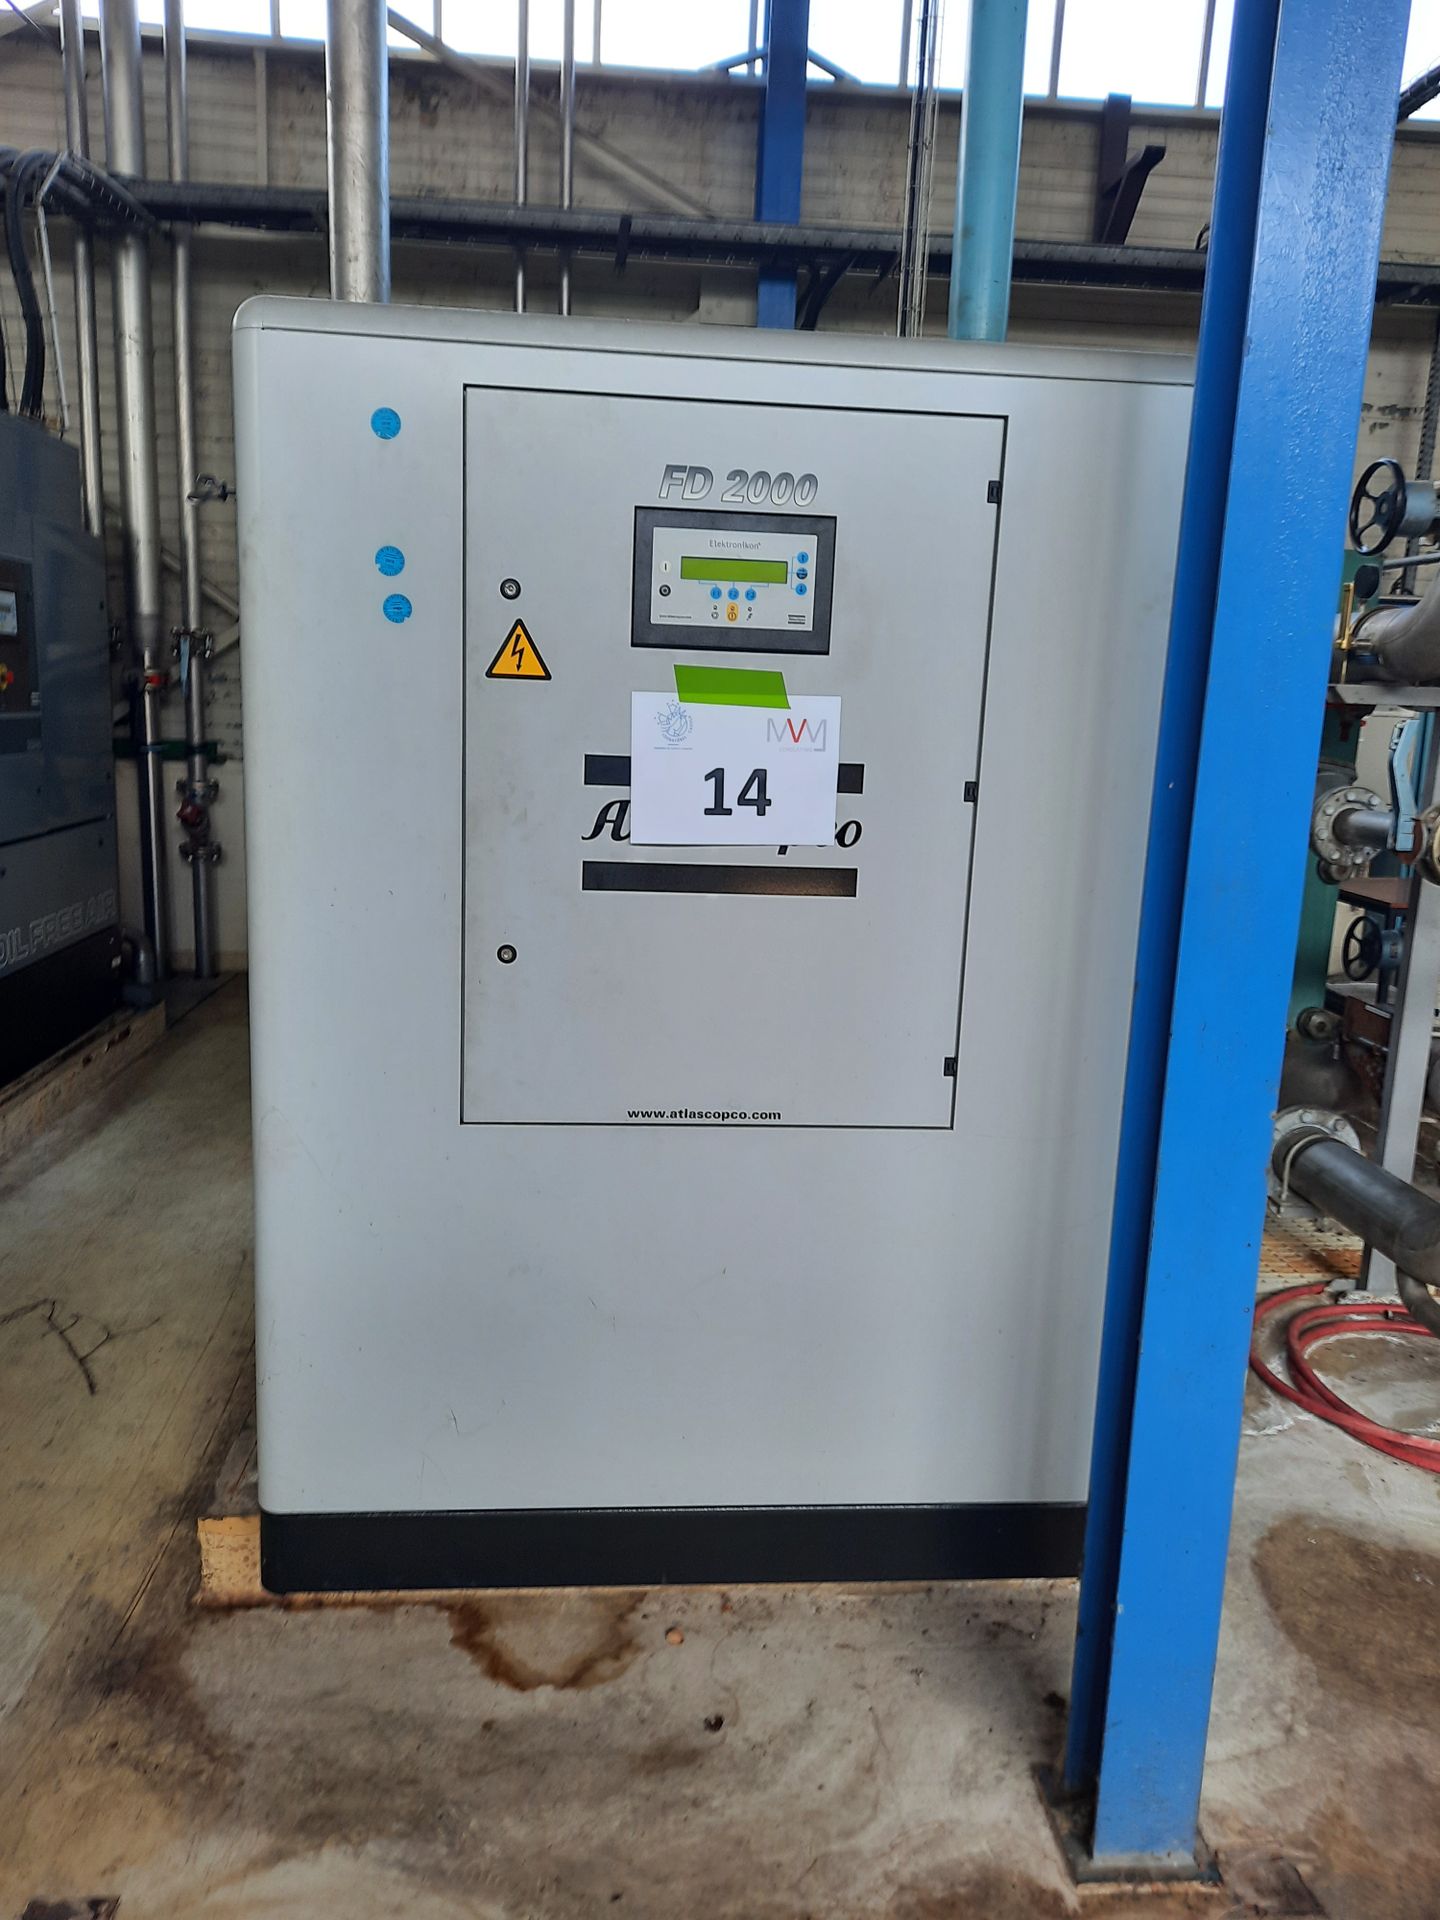 Null 1 air dryer brand ATLAS COPCO type FD 2000 W FS, year 2010, serial number A&hellip;